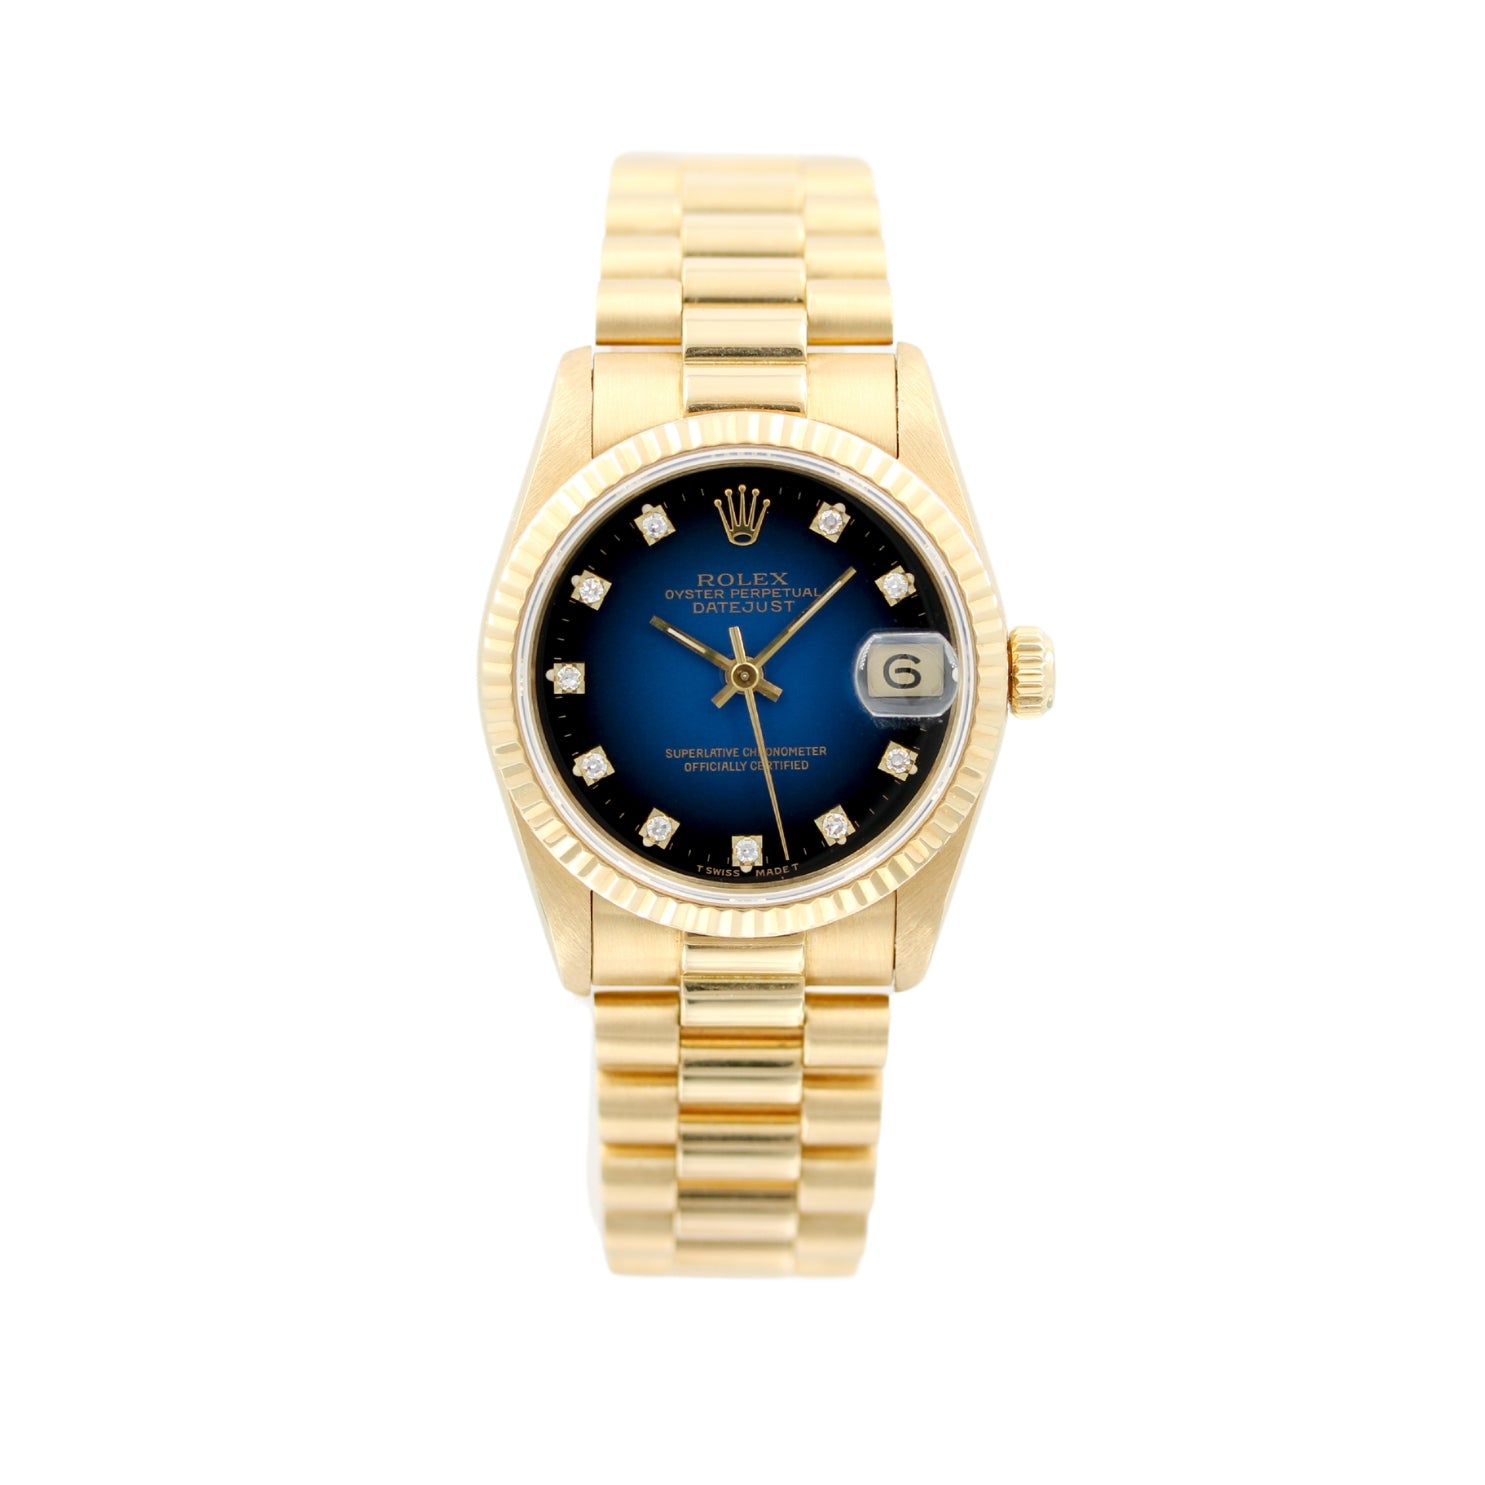 Rolex Lady Datejust, Blue Diamond Dial, Gelbgold, Oyster, Ref. 68278